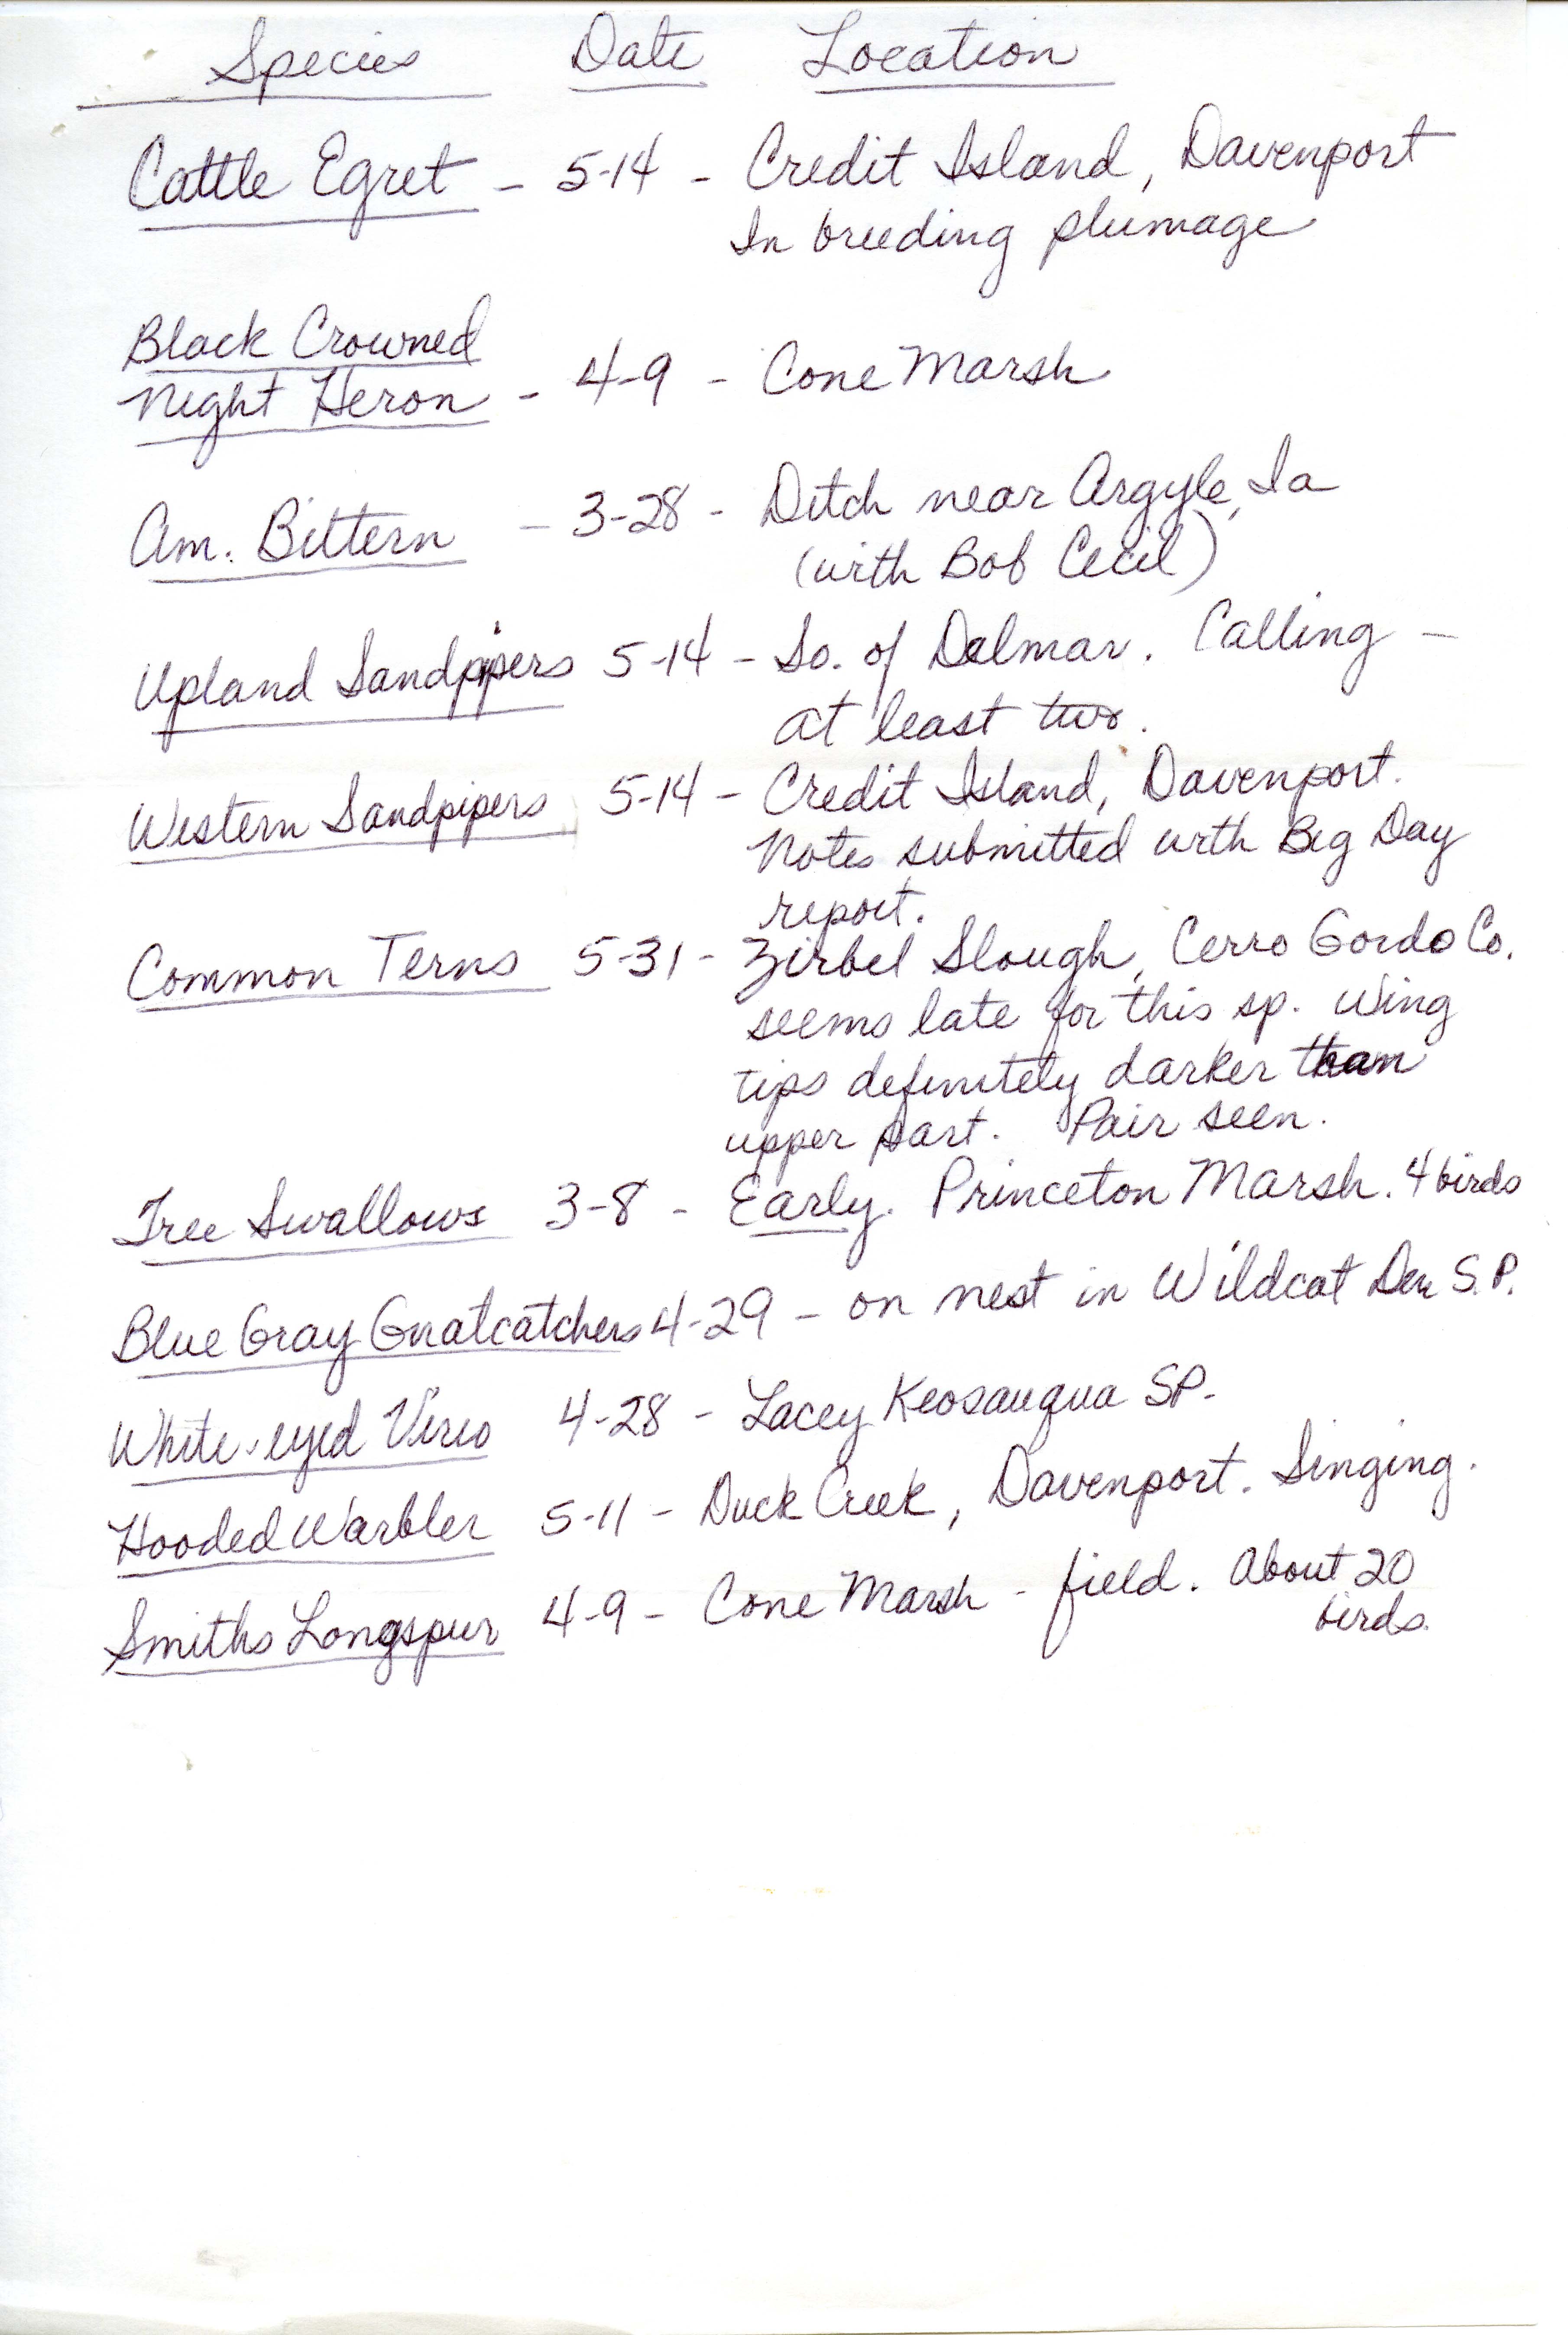 Field notes contributed by Ann M. Barker, June 8, 1987